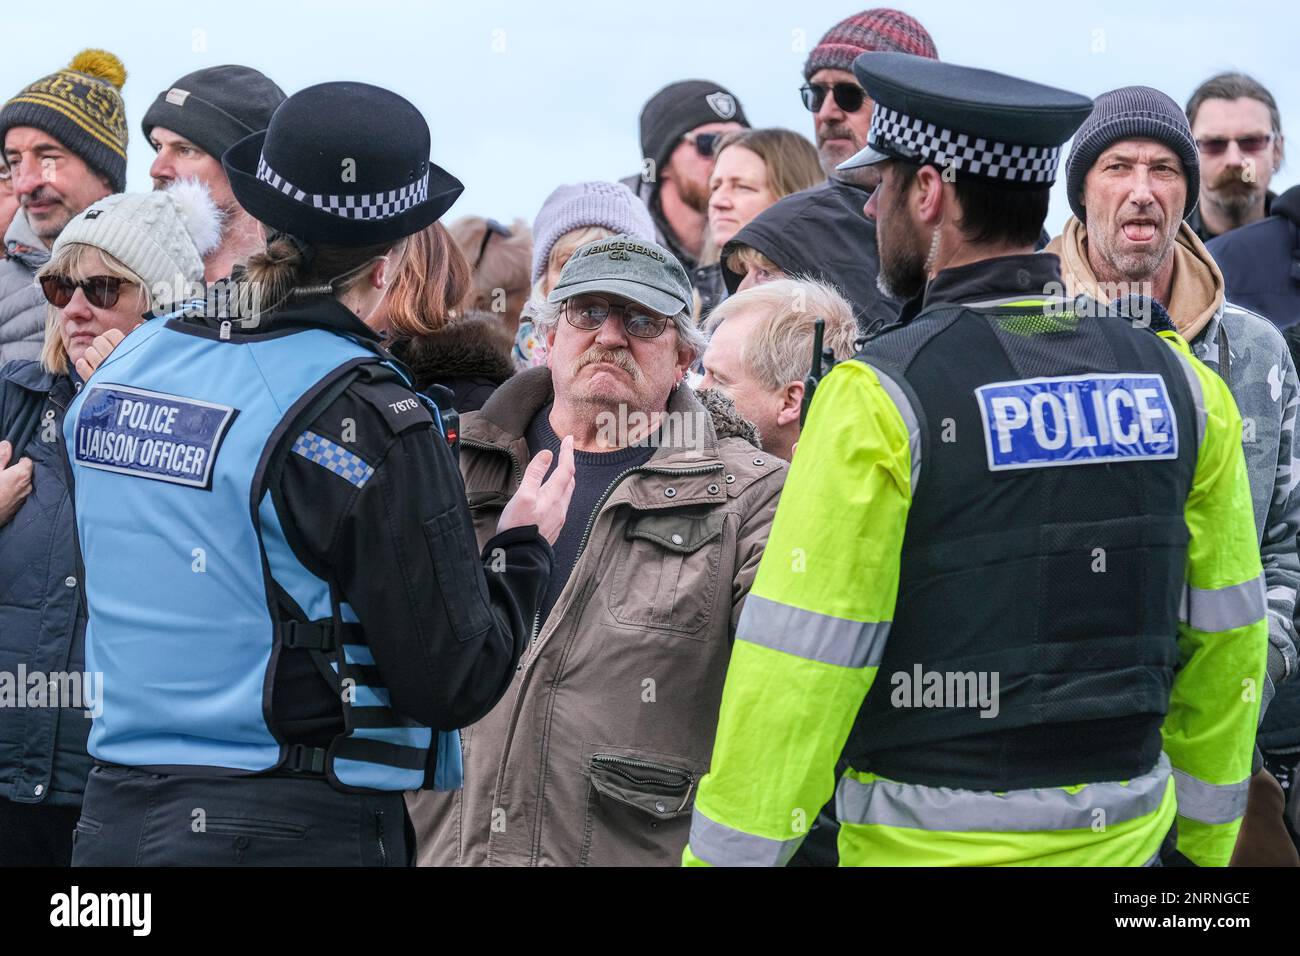 Devon and Cornwall police officers speaking to people protesting against asylum seekers being housed in the Beresford Hotel in Newquay in Cornwall, UK Stock Photo